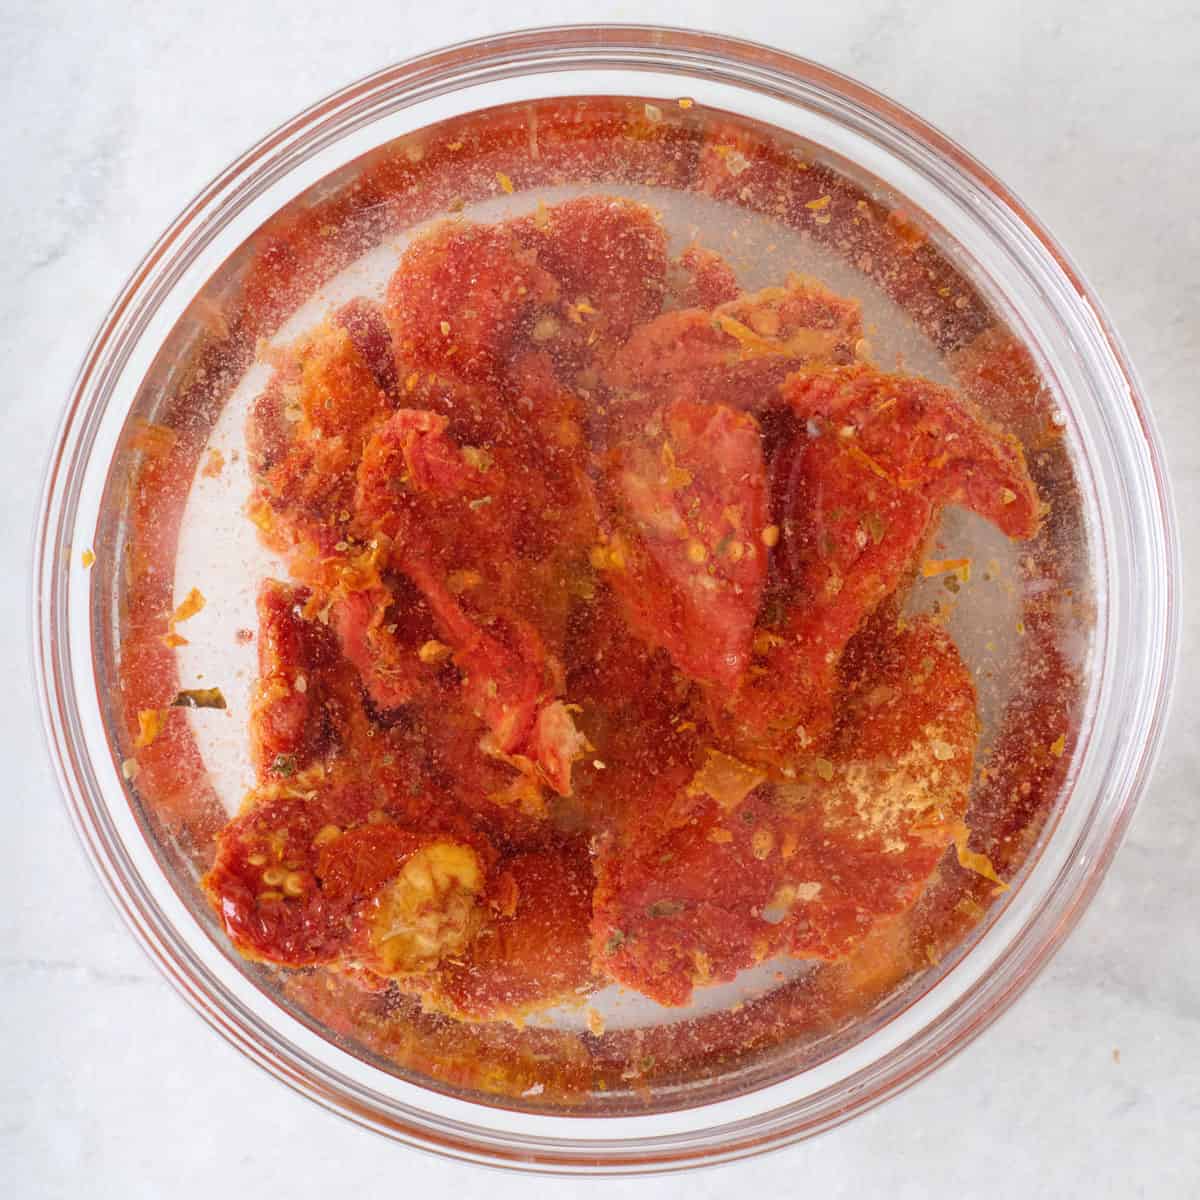 Sundried tomatoes after soaking in water.